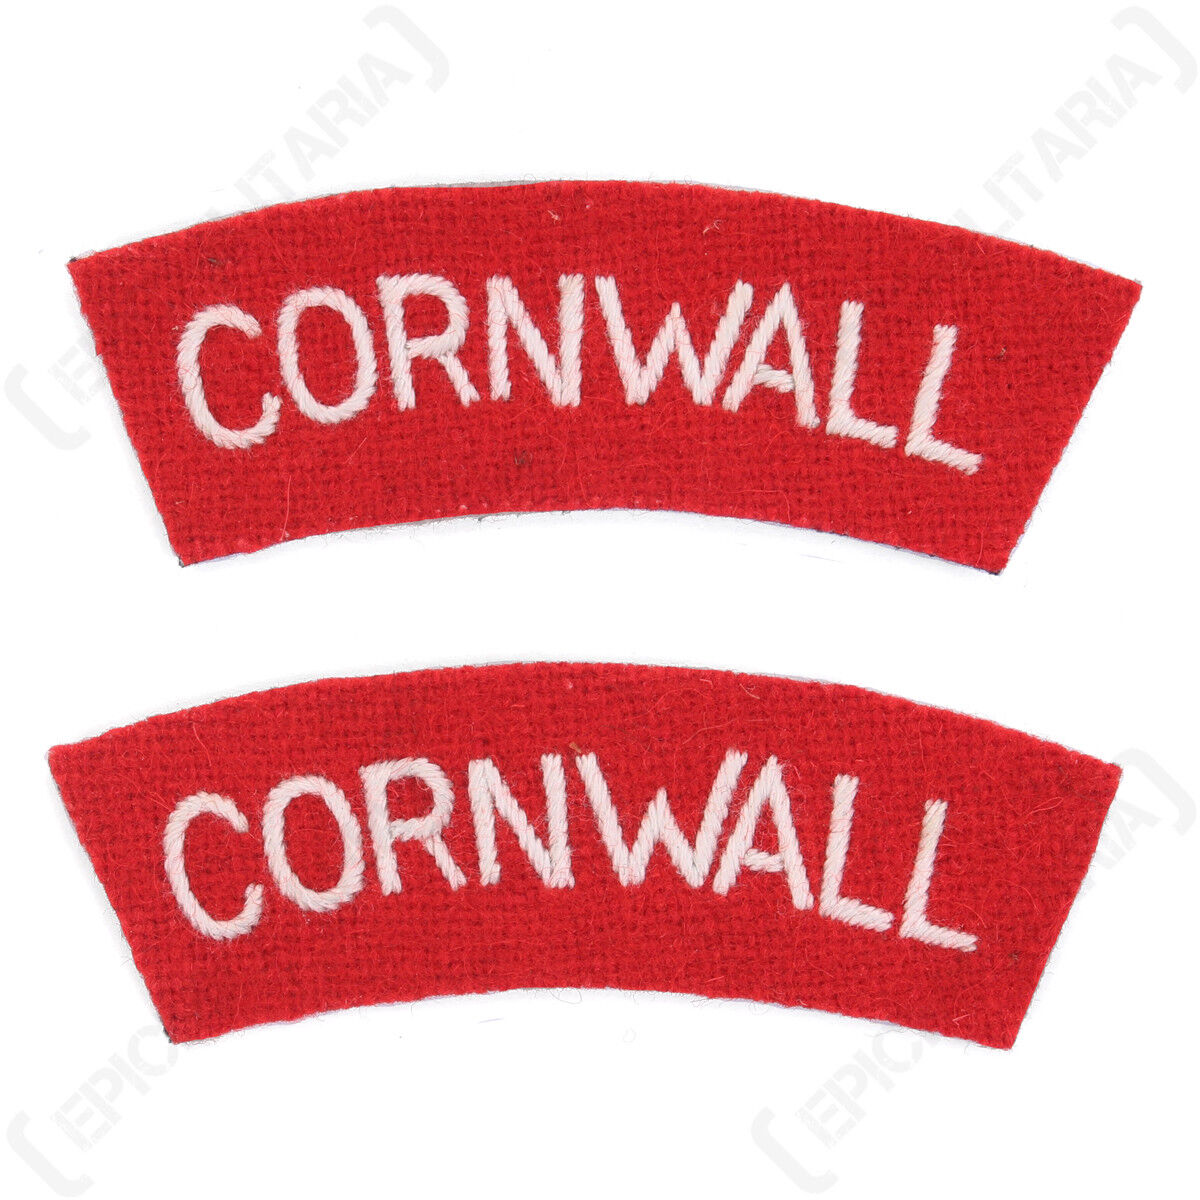 Cornwall Regiment - WW2 Repro Shoulder Title Patch Badge Sleeve Flash Arm Army